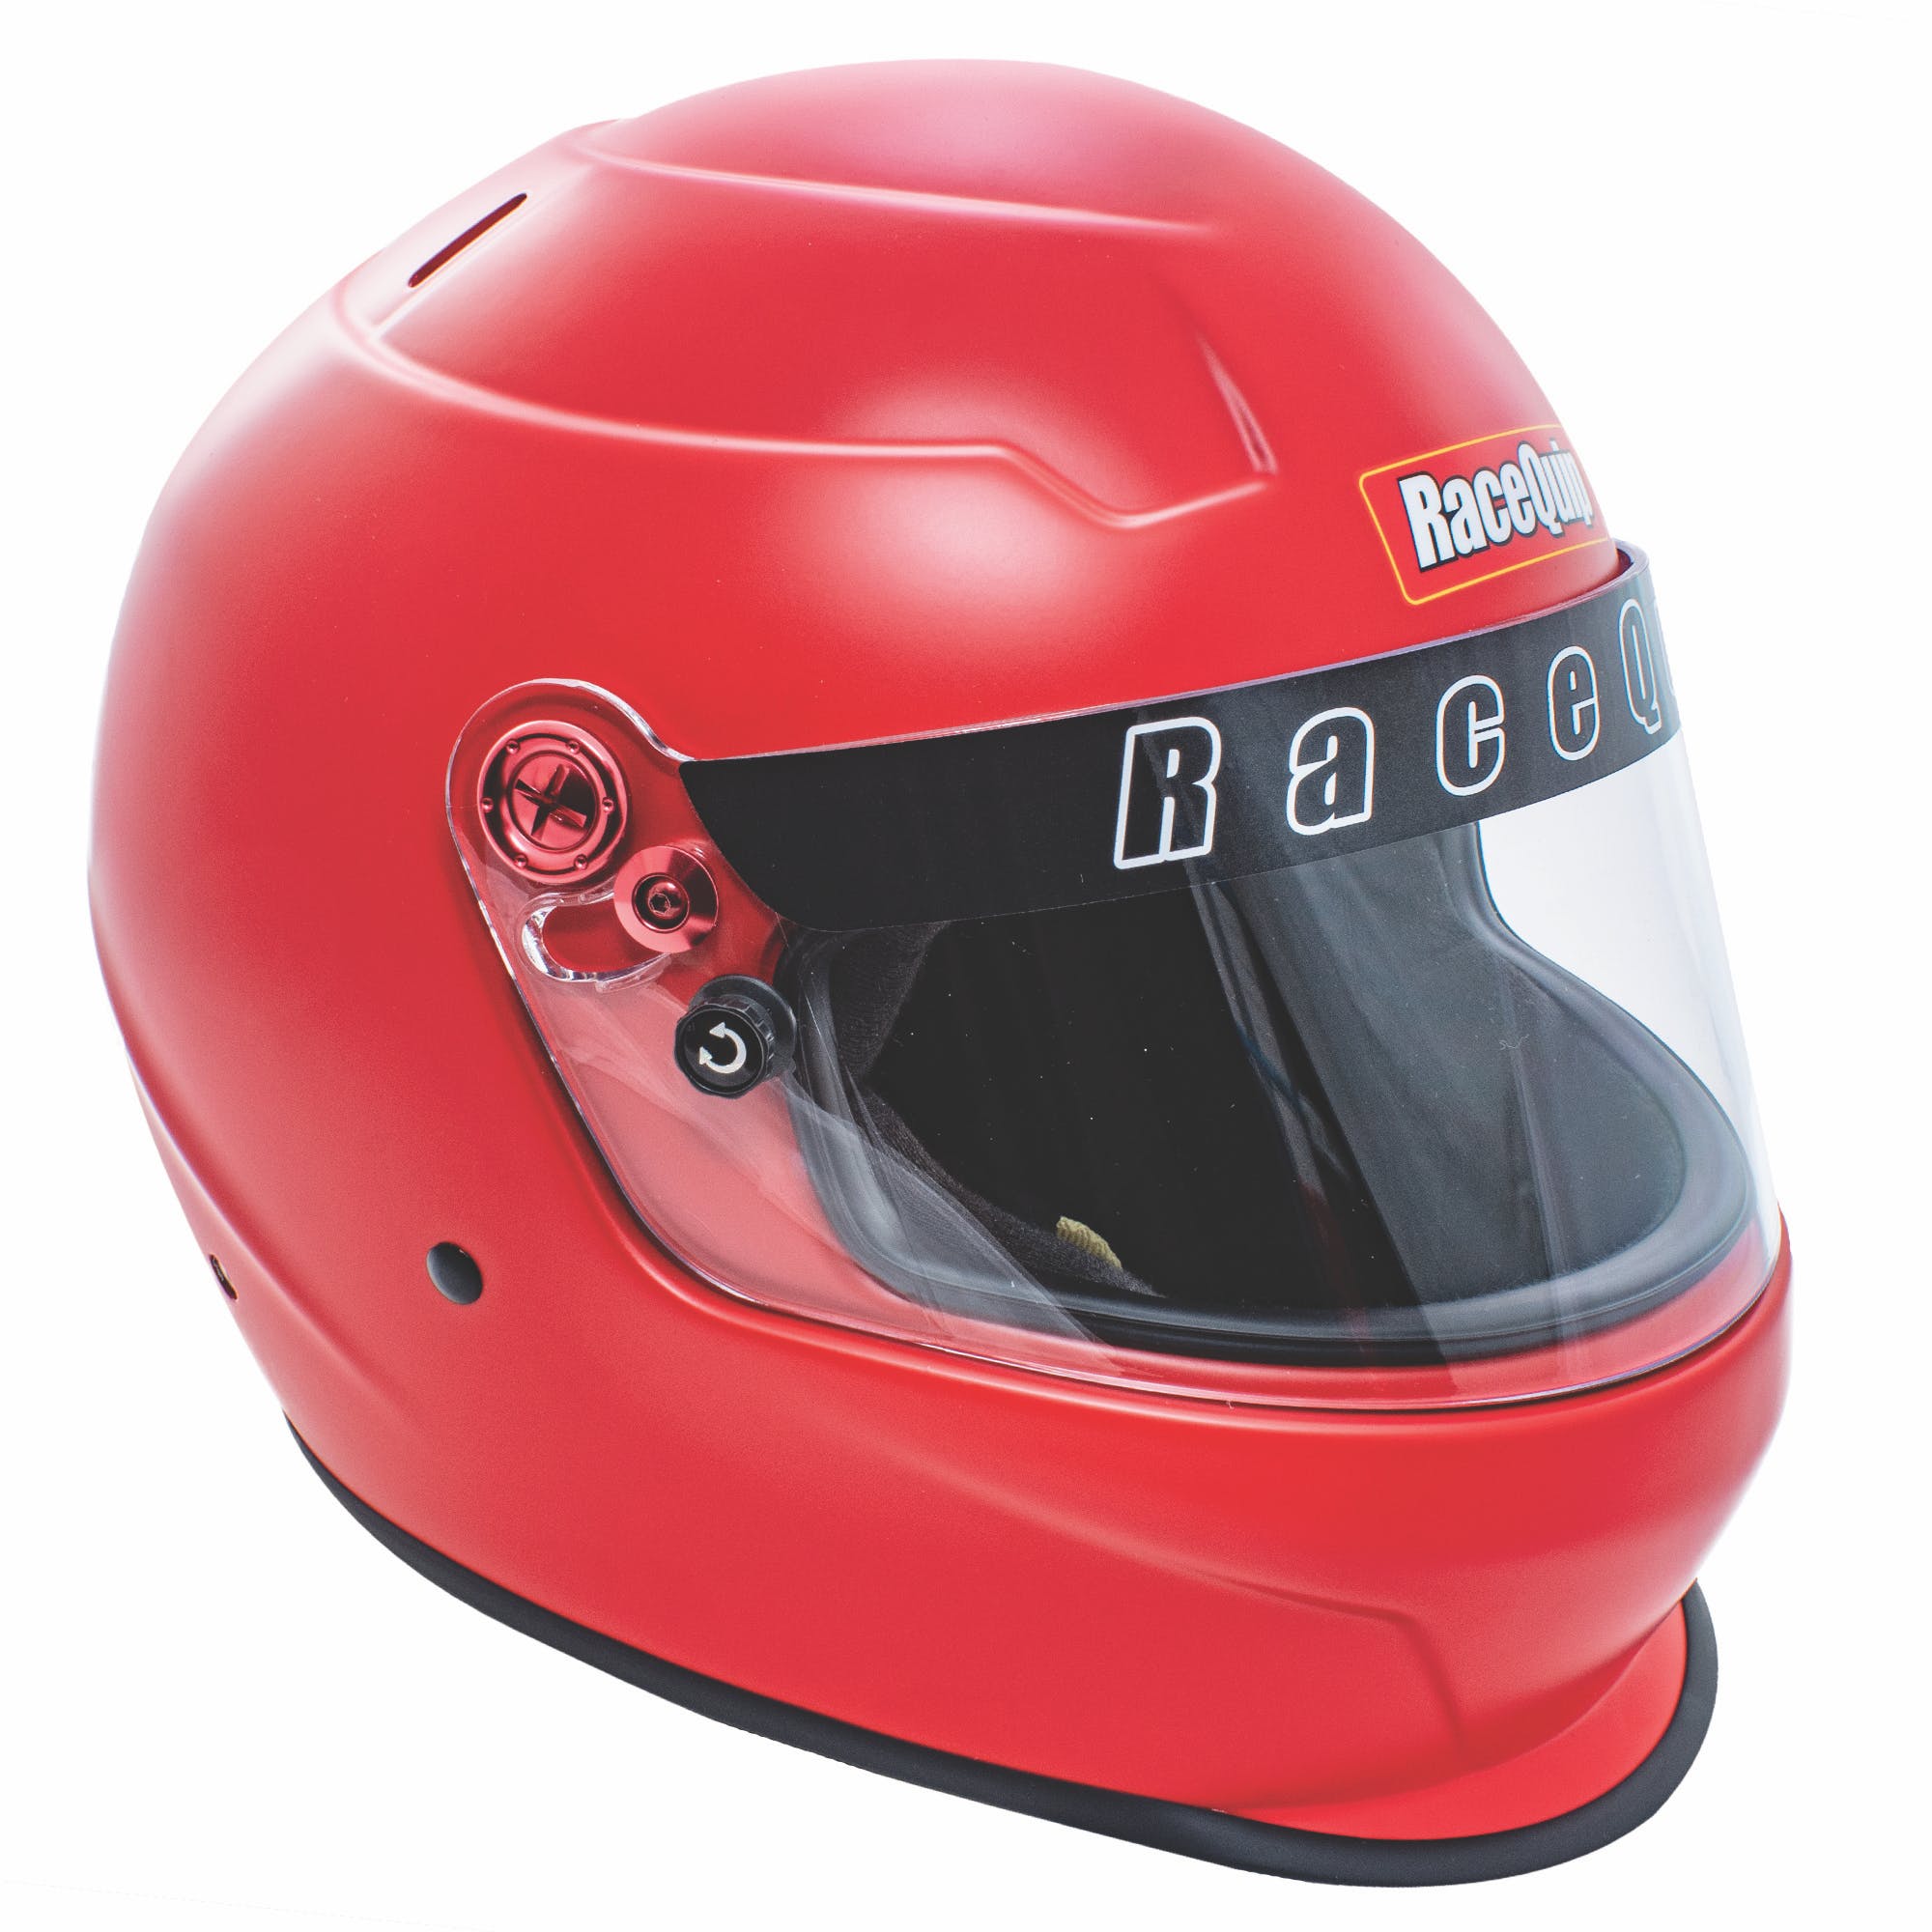 RaceQuip 276915 PRO20 Full Face Helmet Snell SA2020 Rated; Corsa Red Large